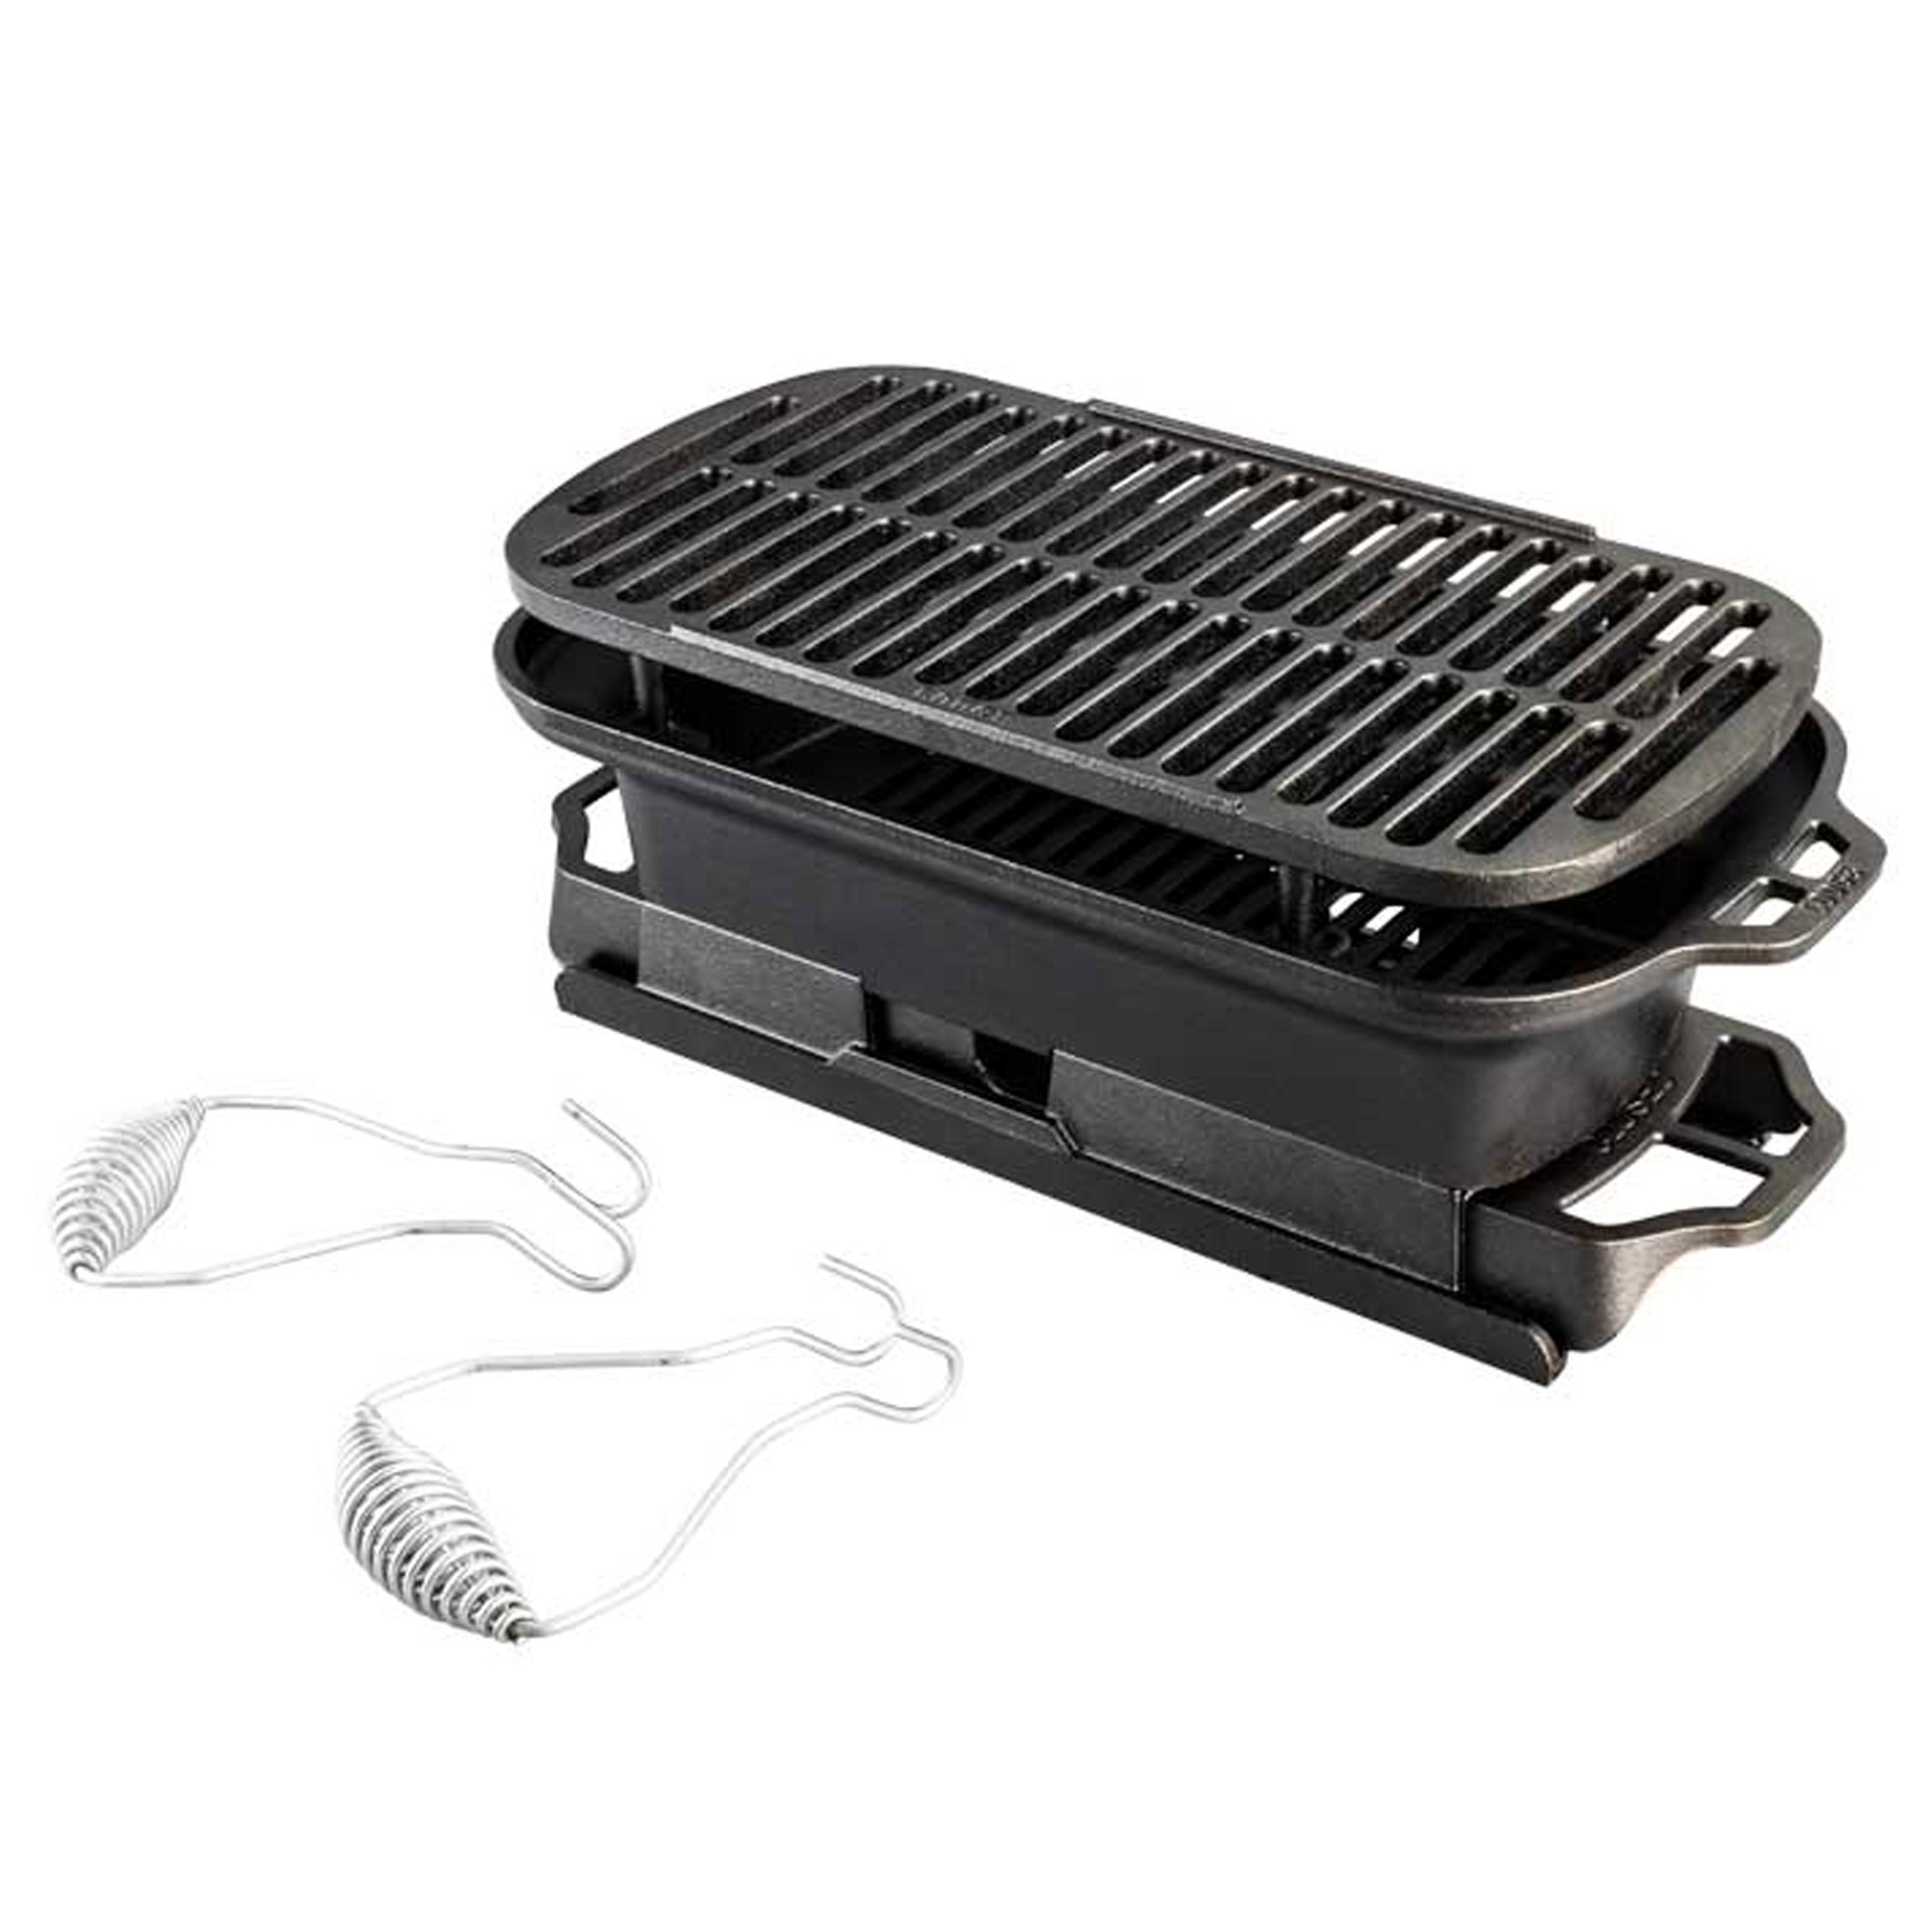 Lodge Reversible Griddle/Grill, Cast Iron Chef Style